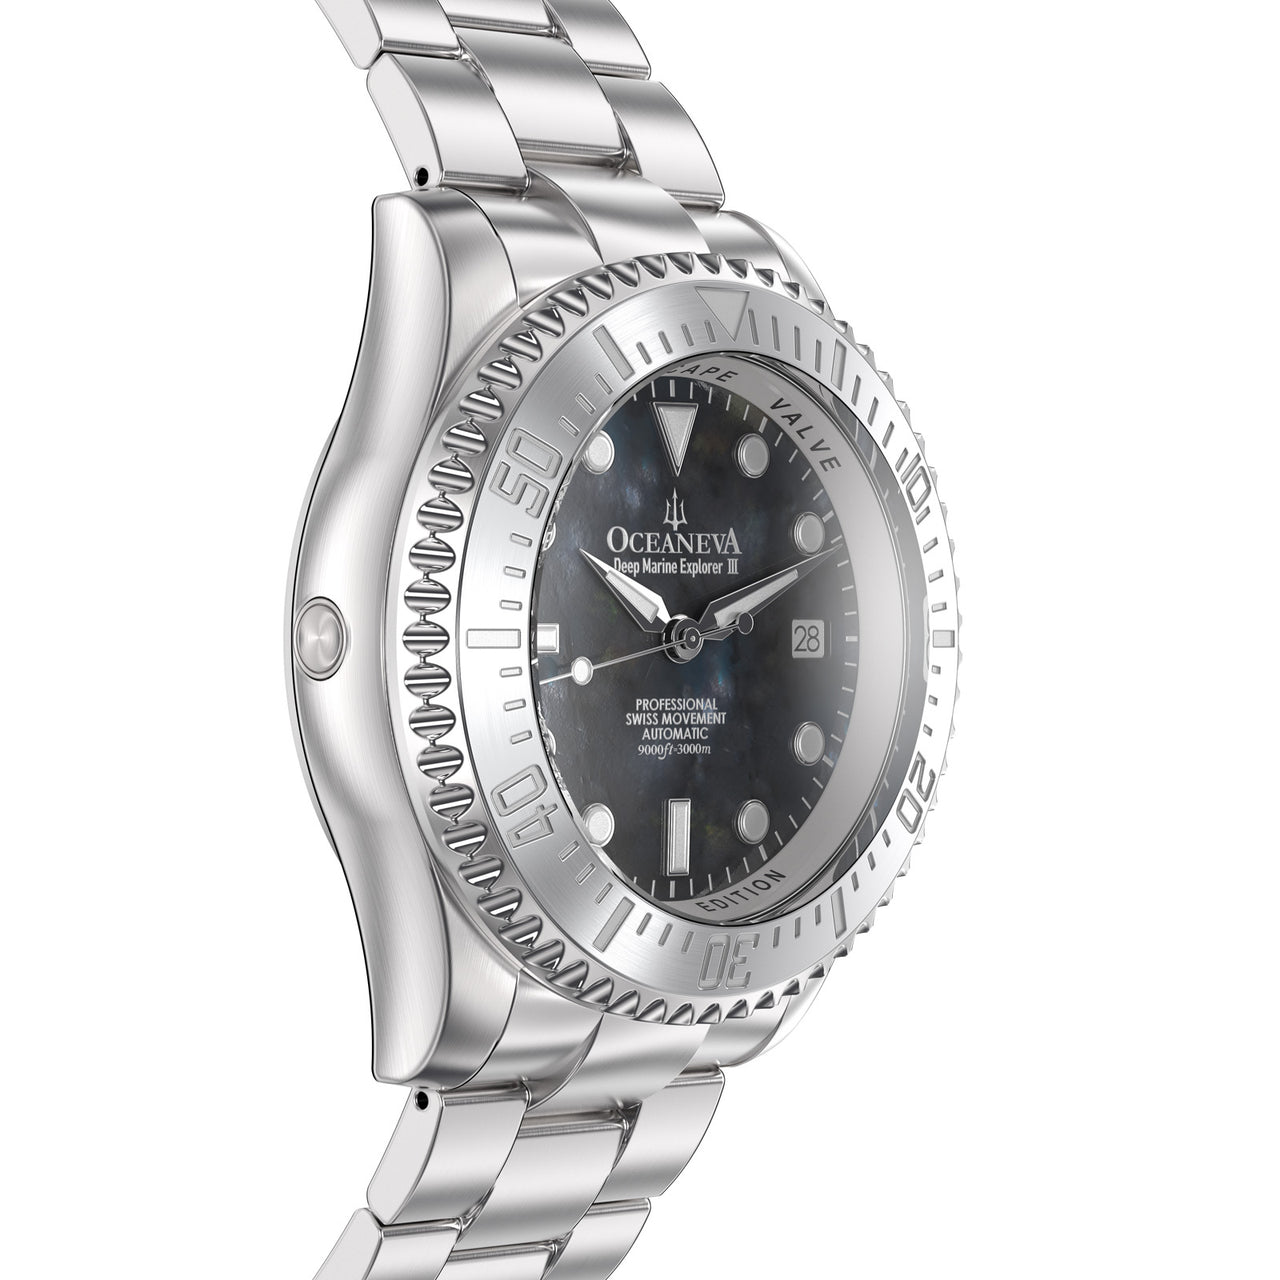 Oceaneva 3000M Dive Watch Gun Metal Gray Mother of Pearl Stainless Side Helium Escape Valve View